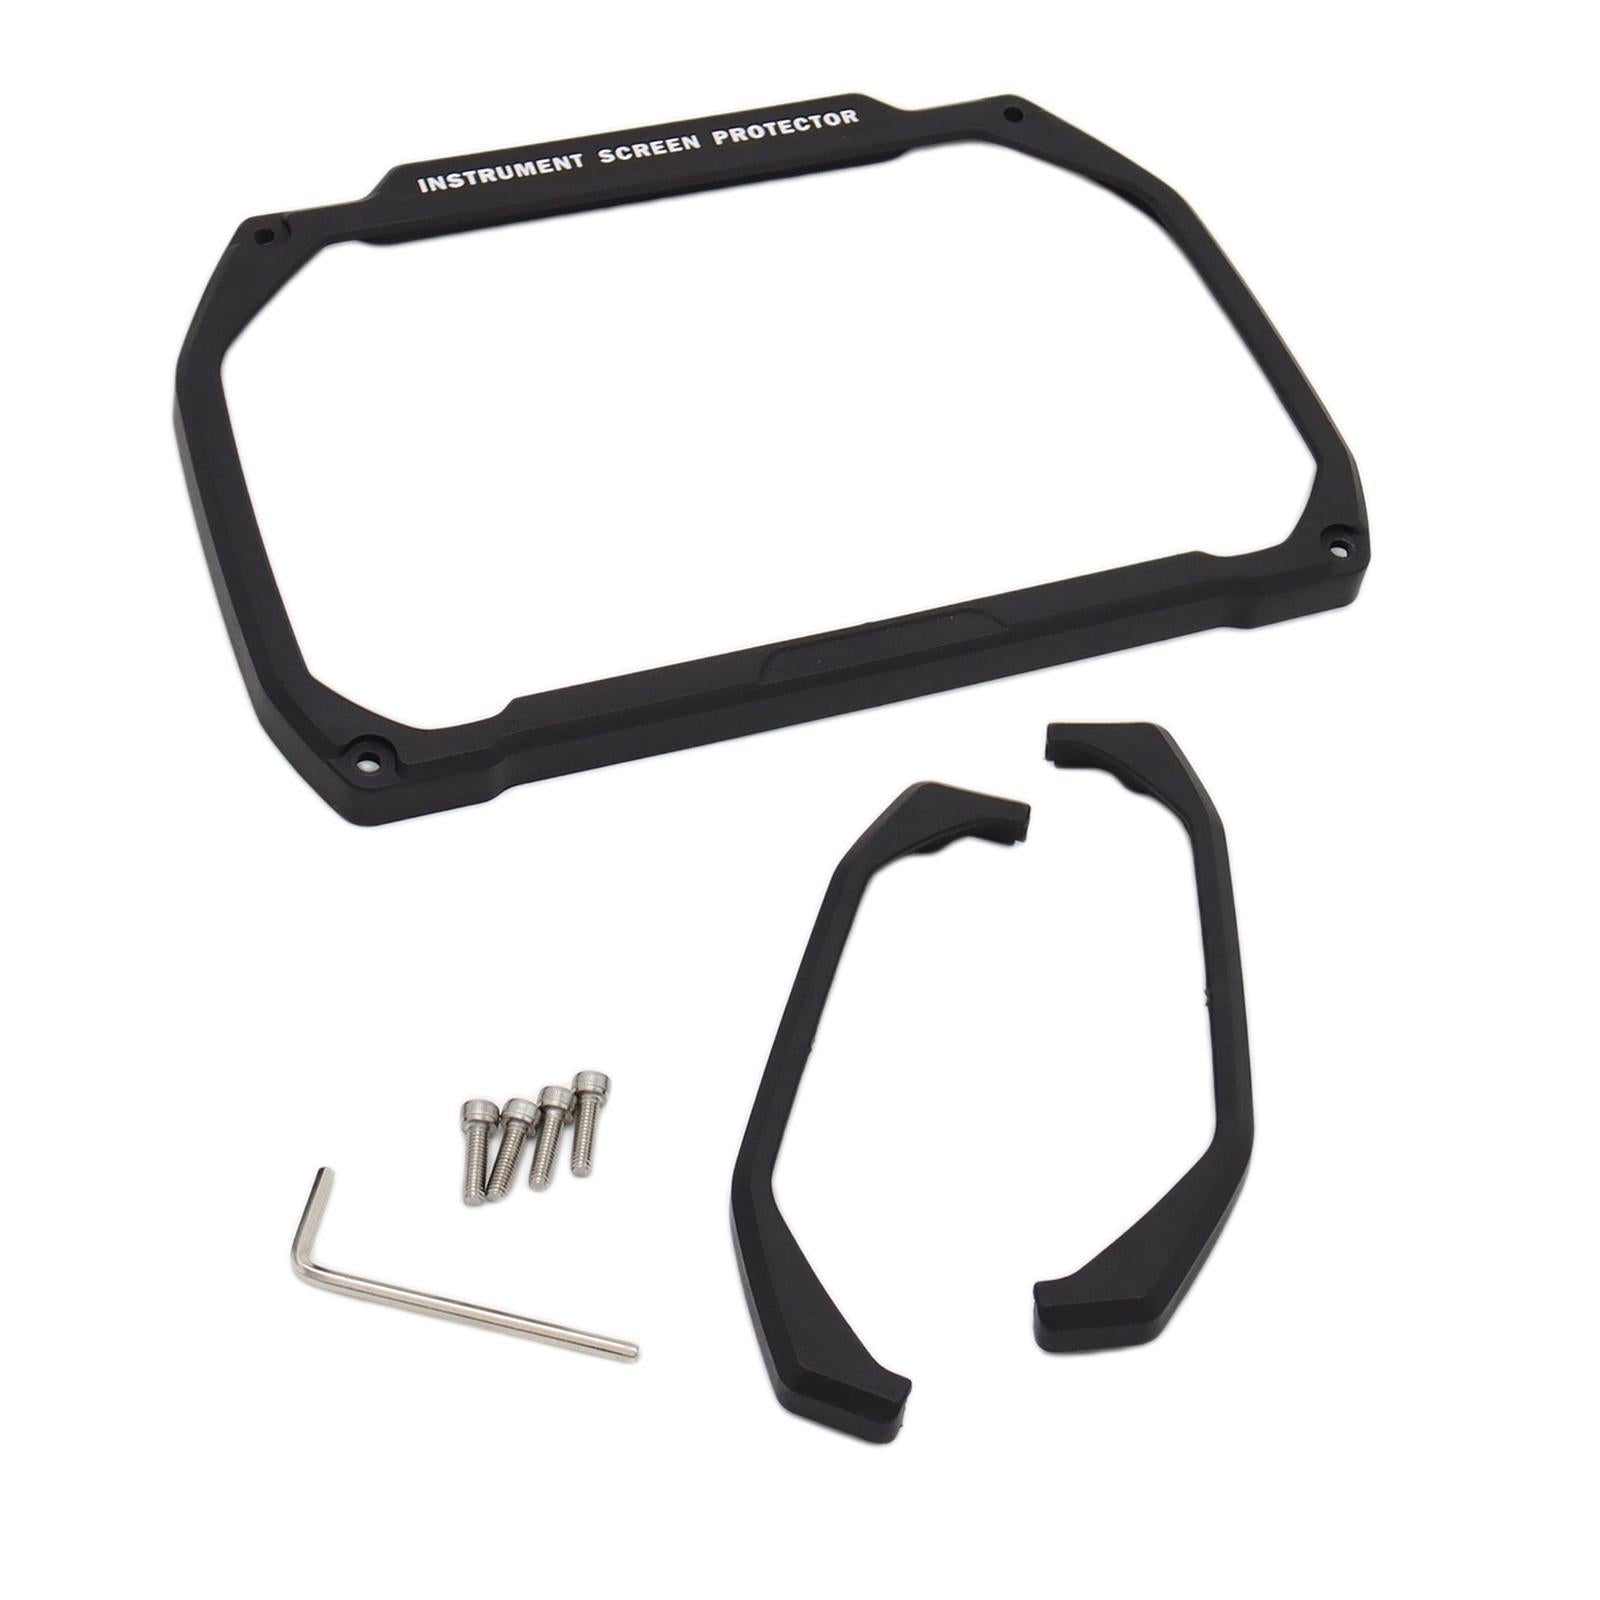 Meter Frame Cover Instrument Screen Protector for BMW R1200GS R1250GS F900